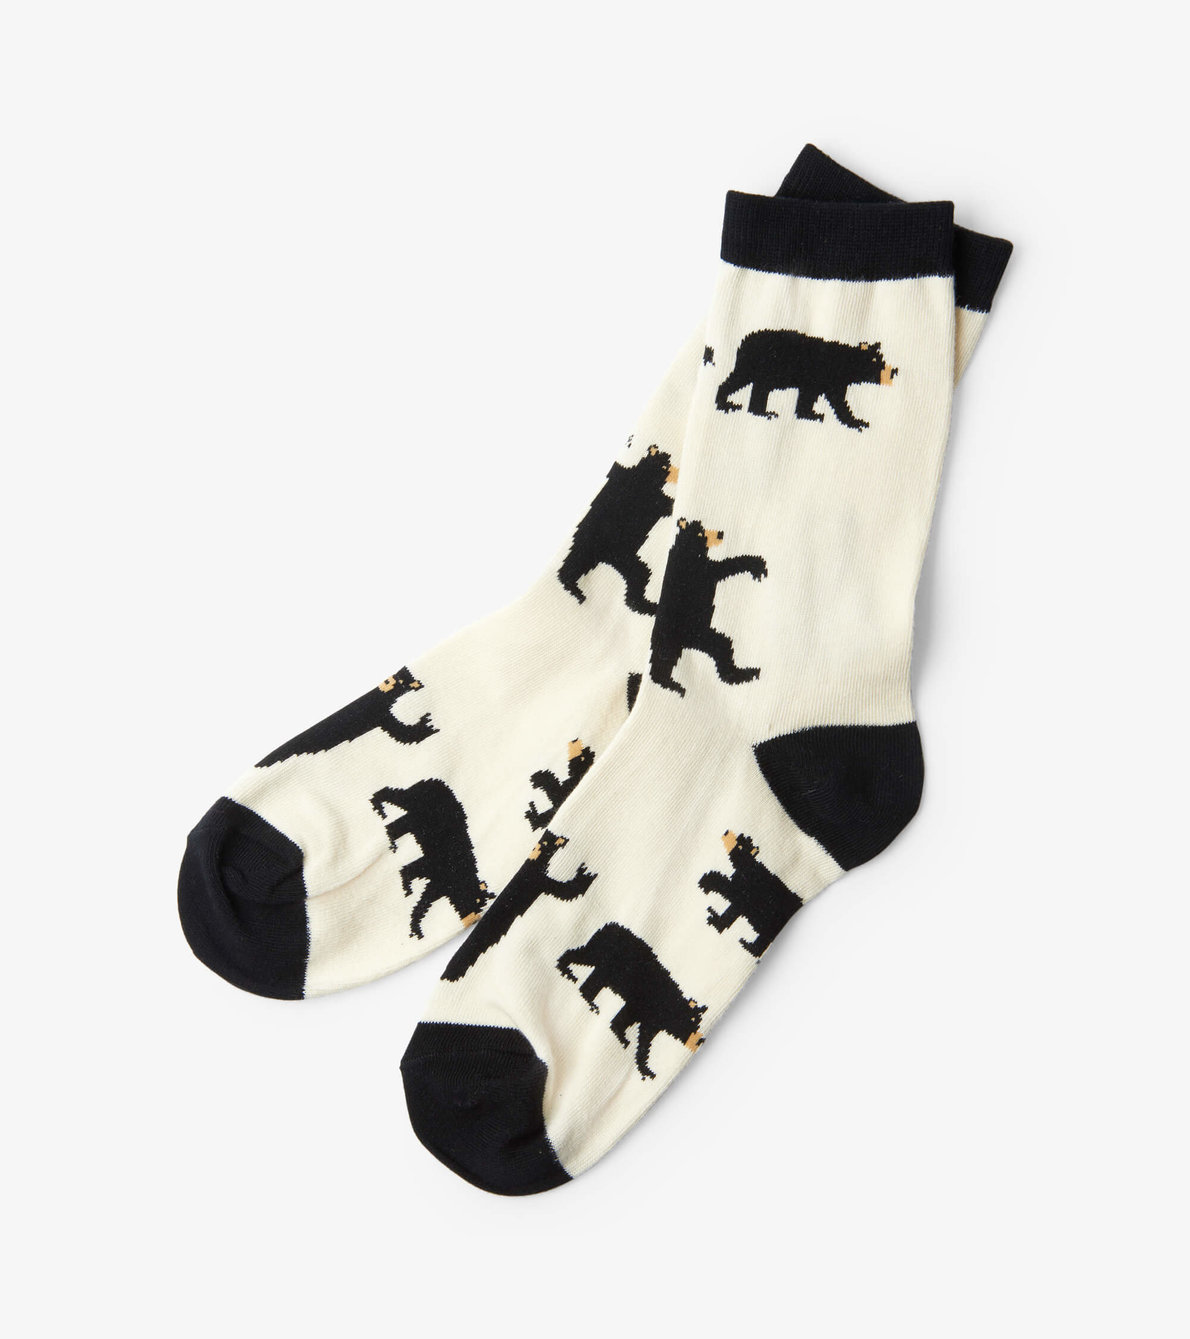 View larger image of Black Bears on Natural Women's Crew Socks